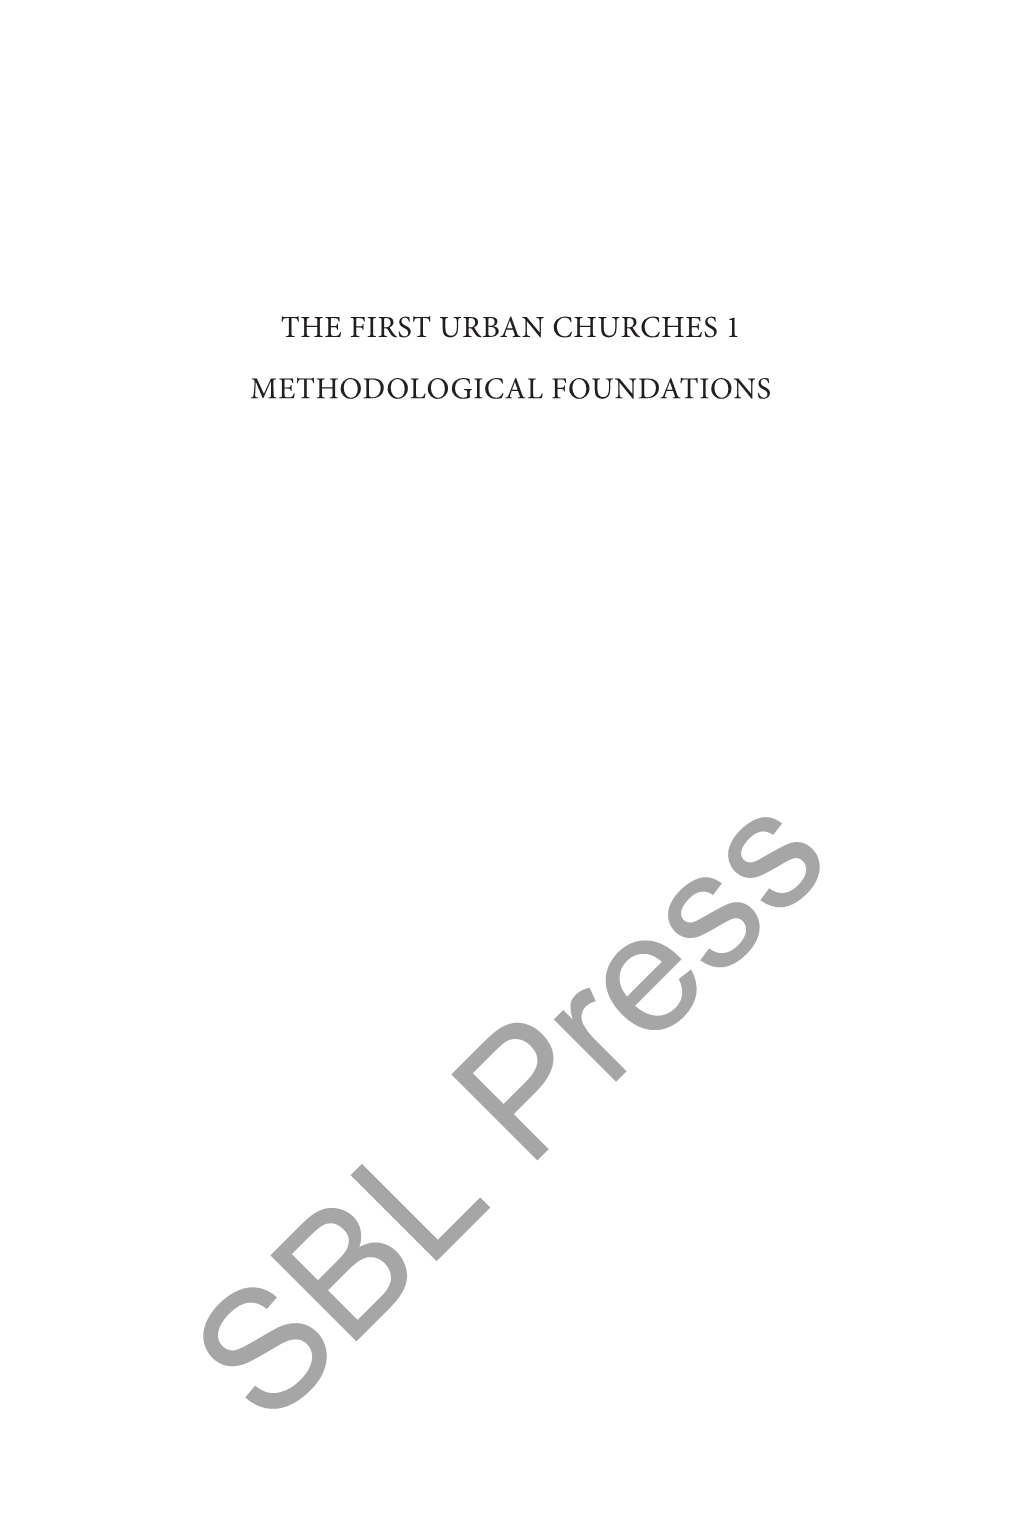 The First Urban Churches 1 Methodological Foundations